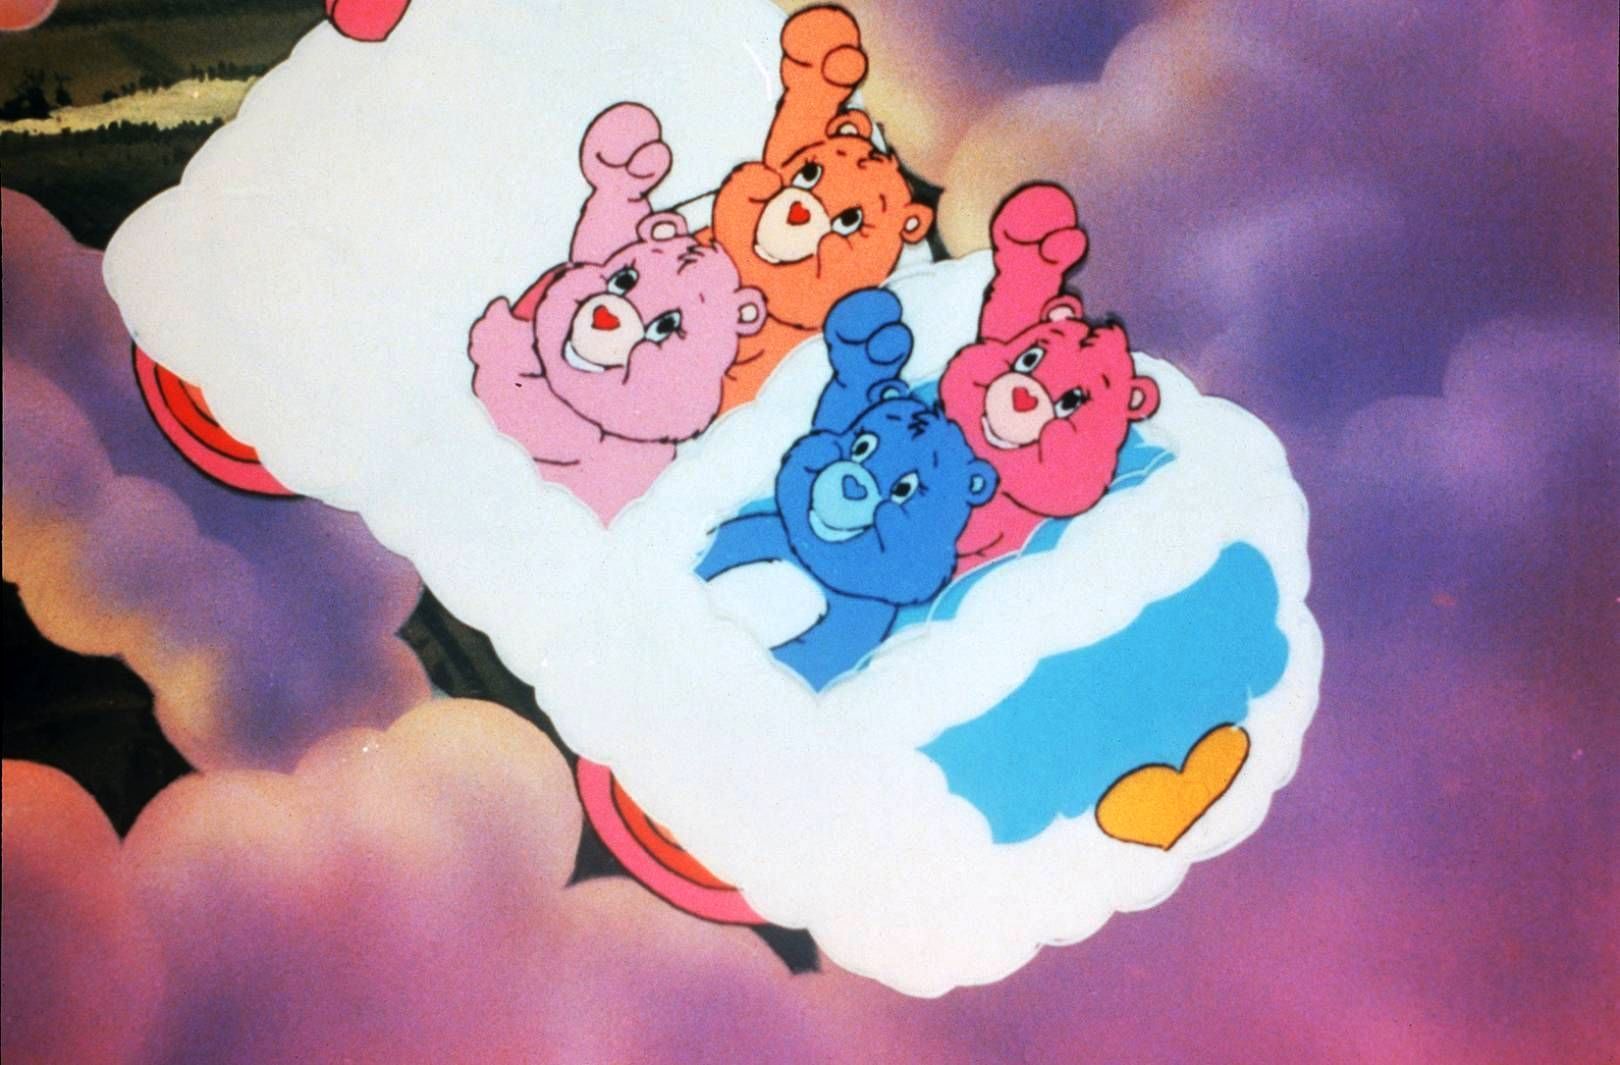 The Care Bears in a cloud bed, from the 1980s TV show. - Care Bears